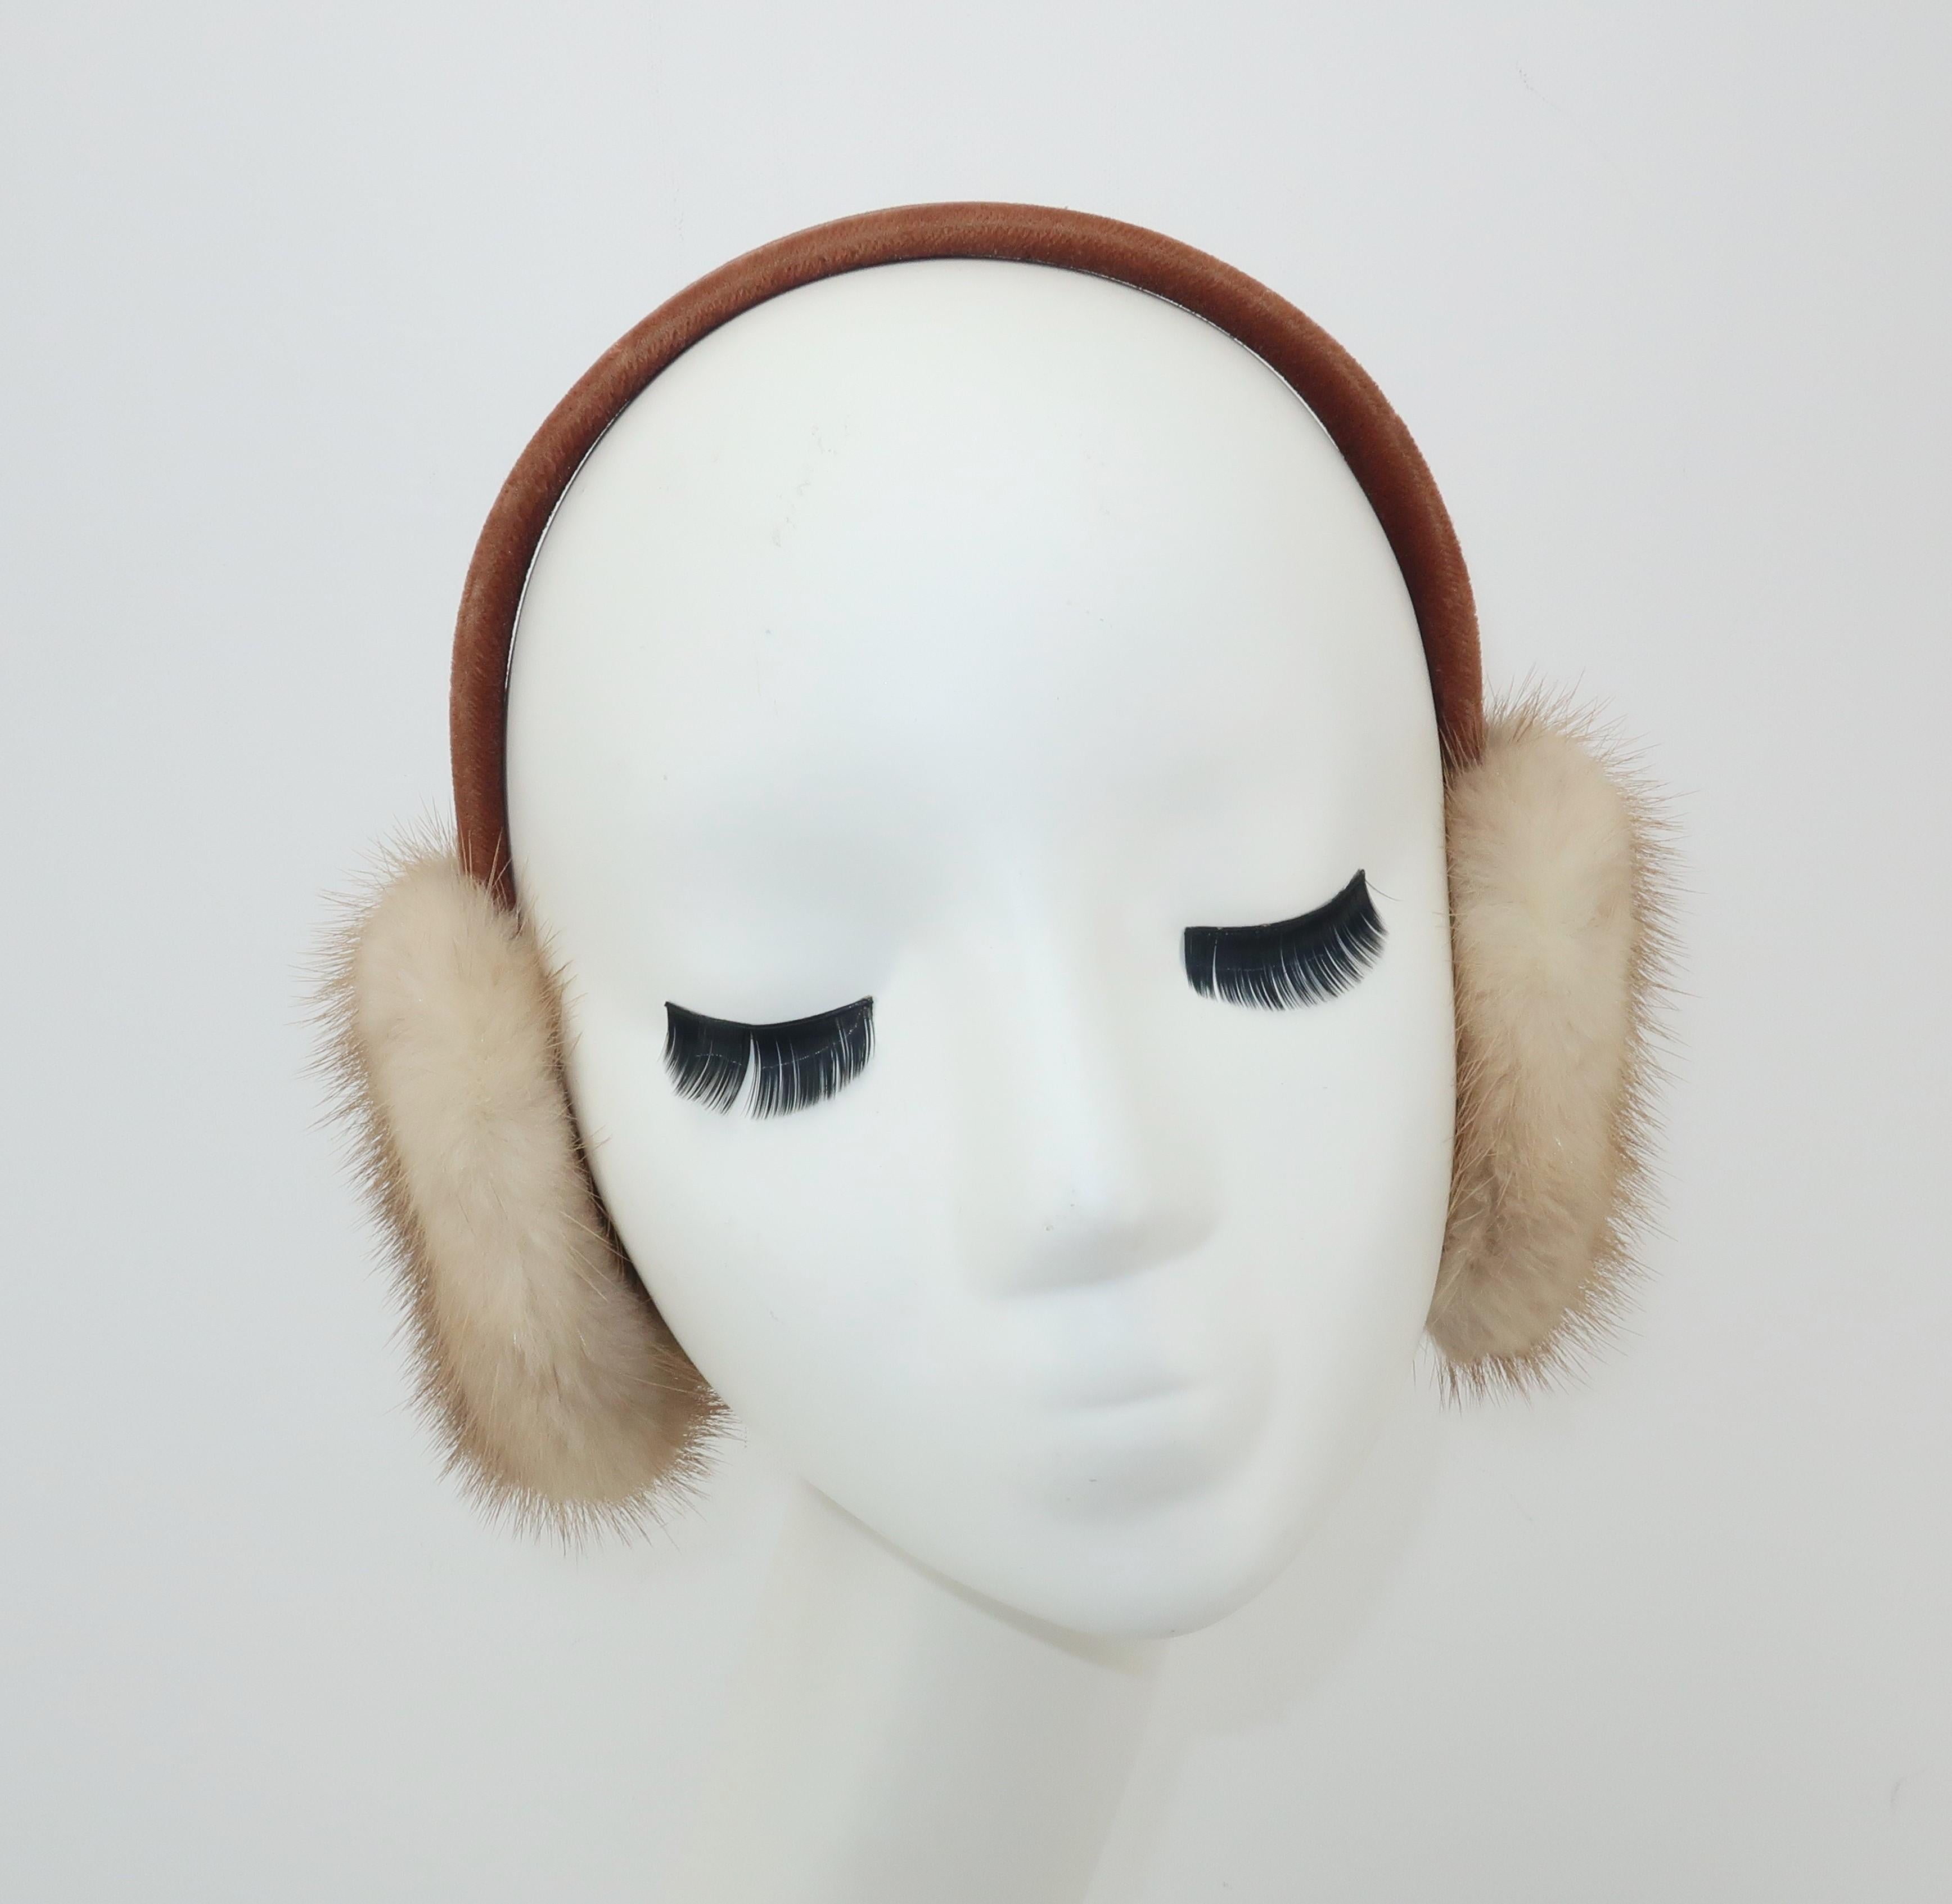 What an adorable way to fend off the winter chill!  These vintage ear muffs are fabricated from blonde mink fur and a light brown velvet covered headband.  Very good condition with light wear to the velvet fabric at the edges of the band as shown in